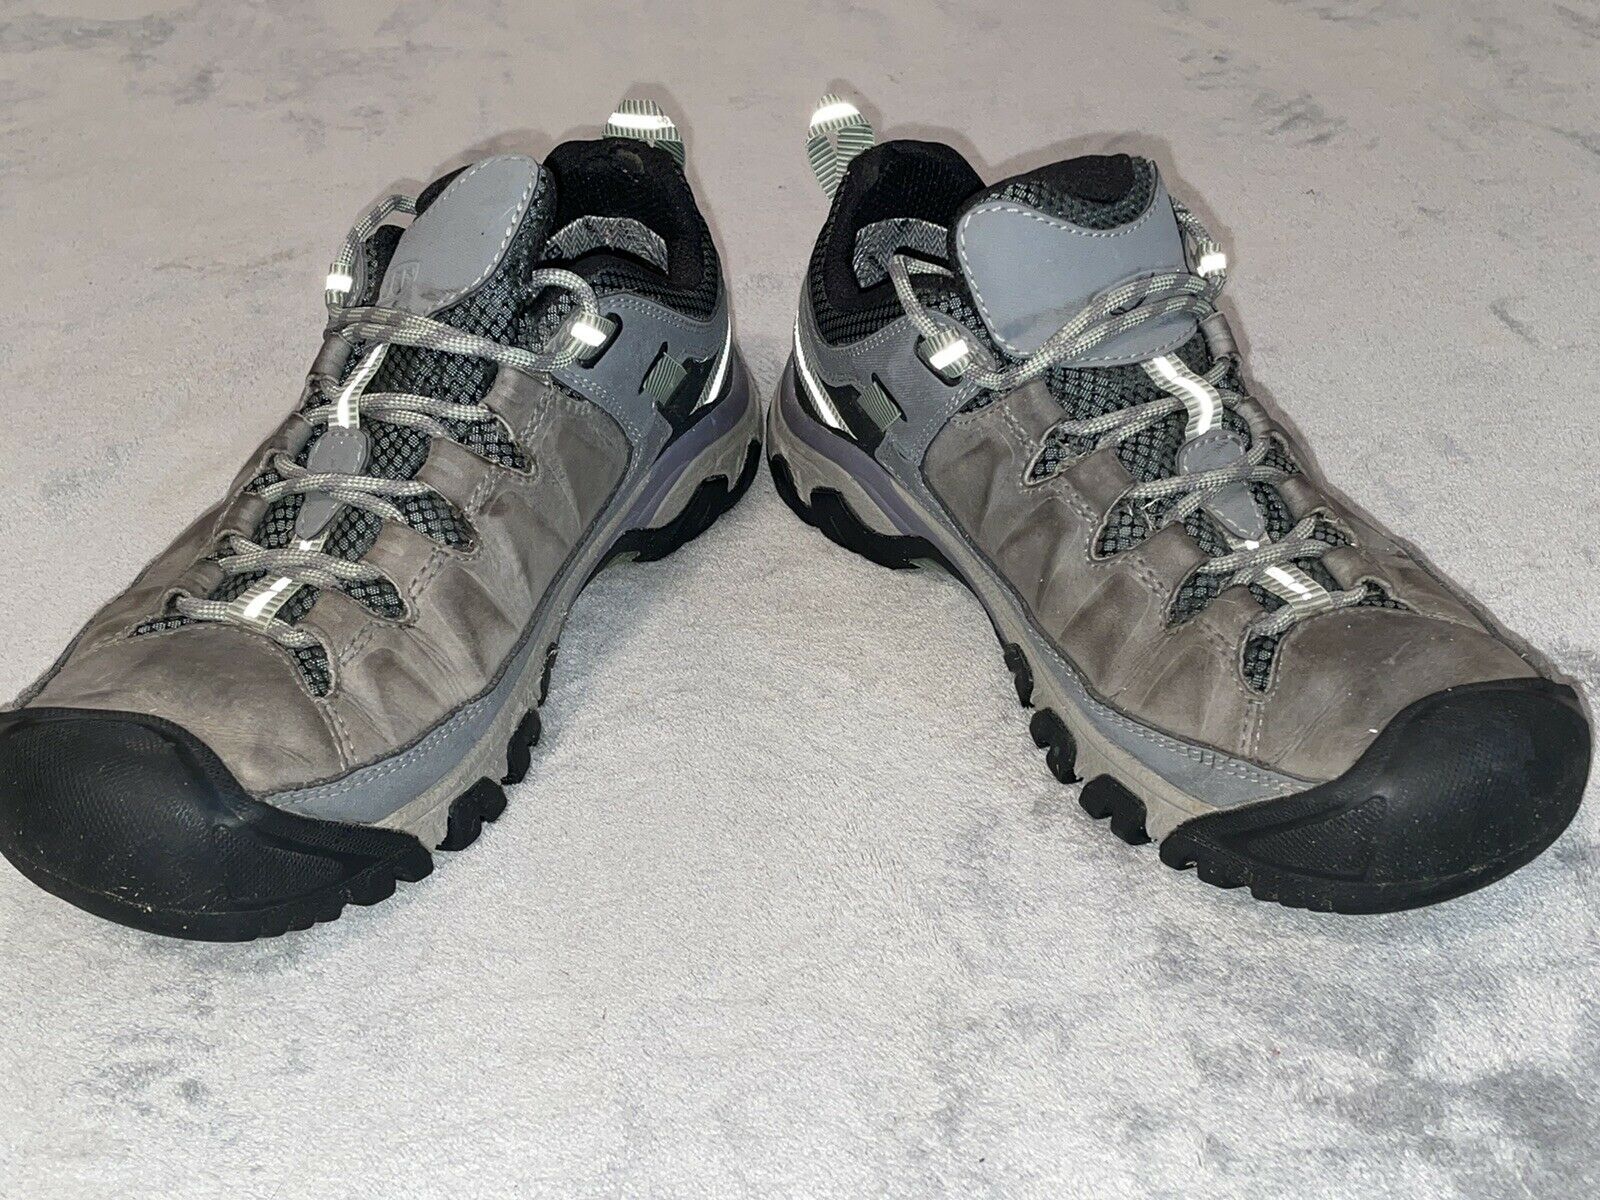 Keen Targhee III 1018155 Women's Gray Leather Lace Up Hiking Boots Shoes 9.5 US